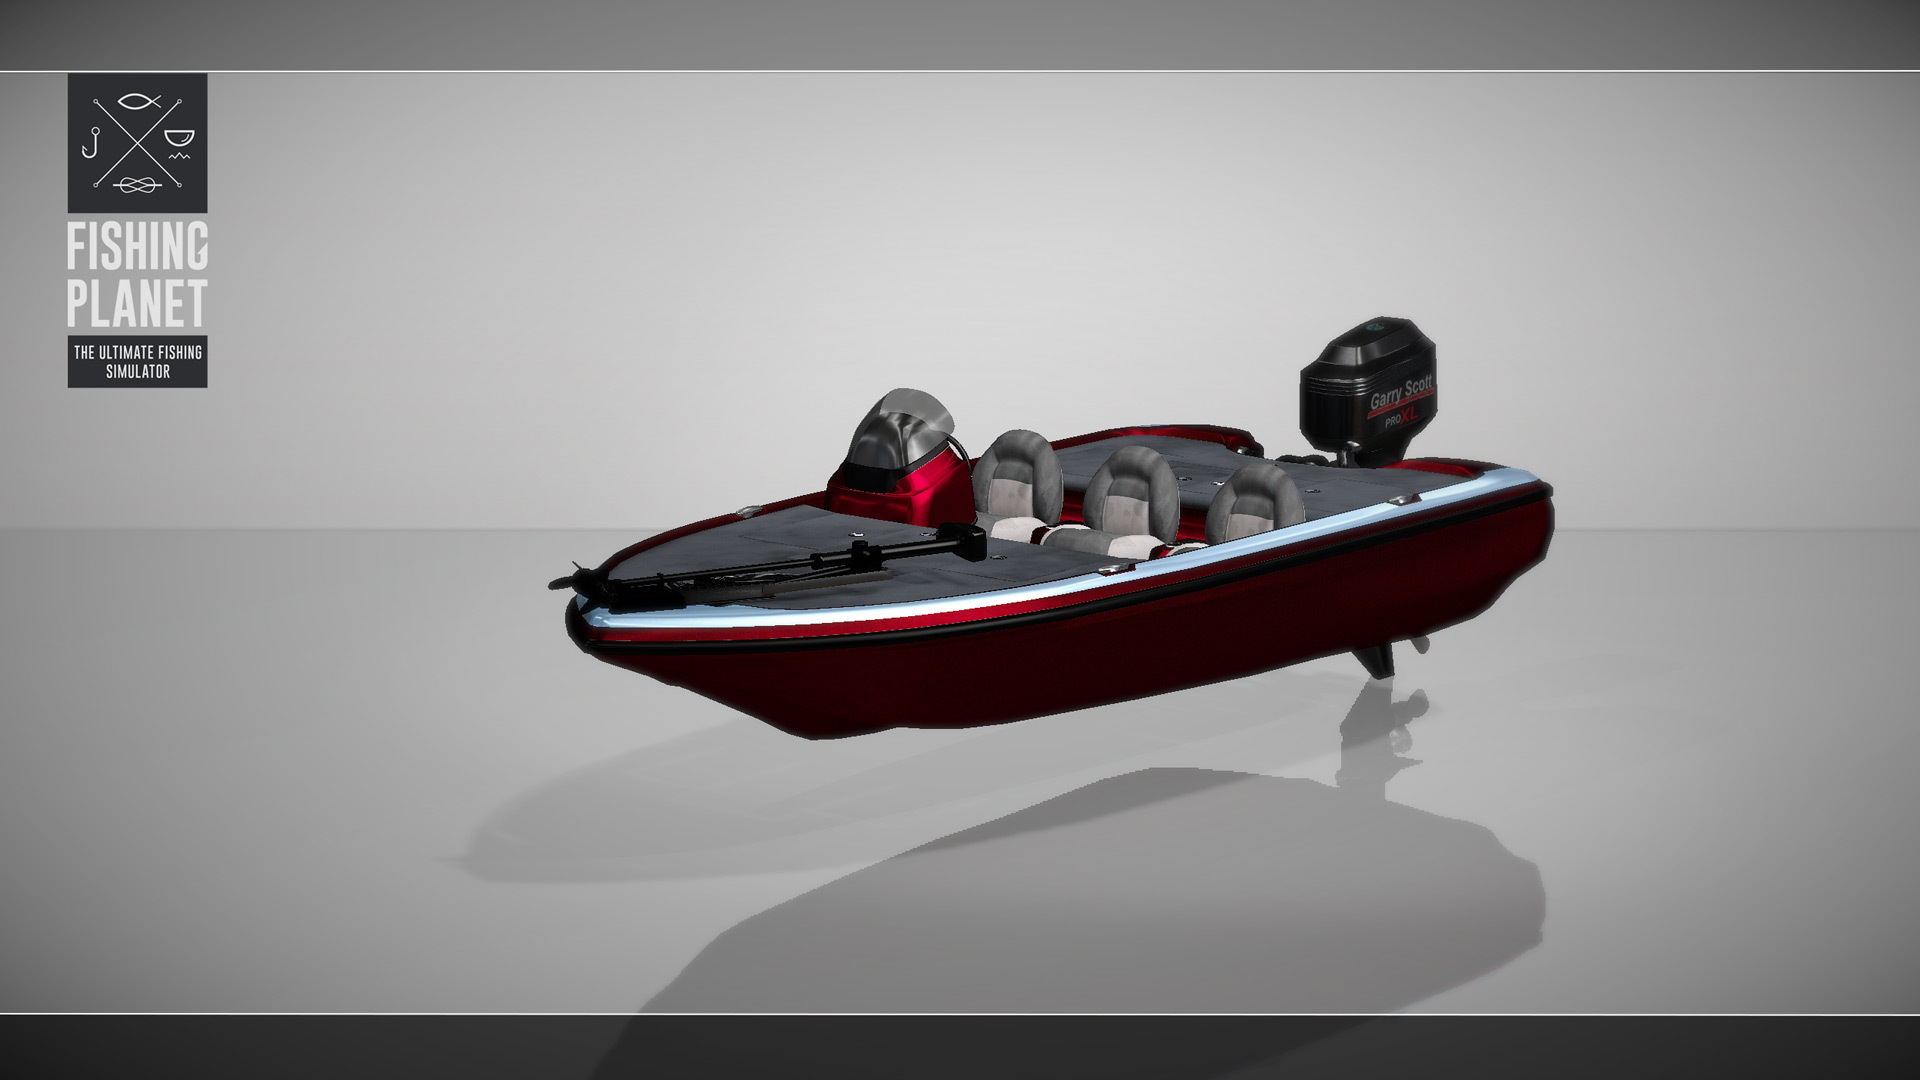 bass boats :: Fishing Planet General Discussions